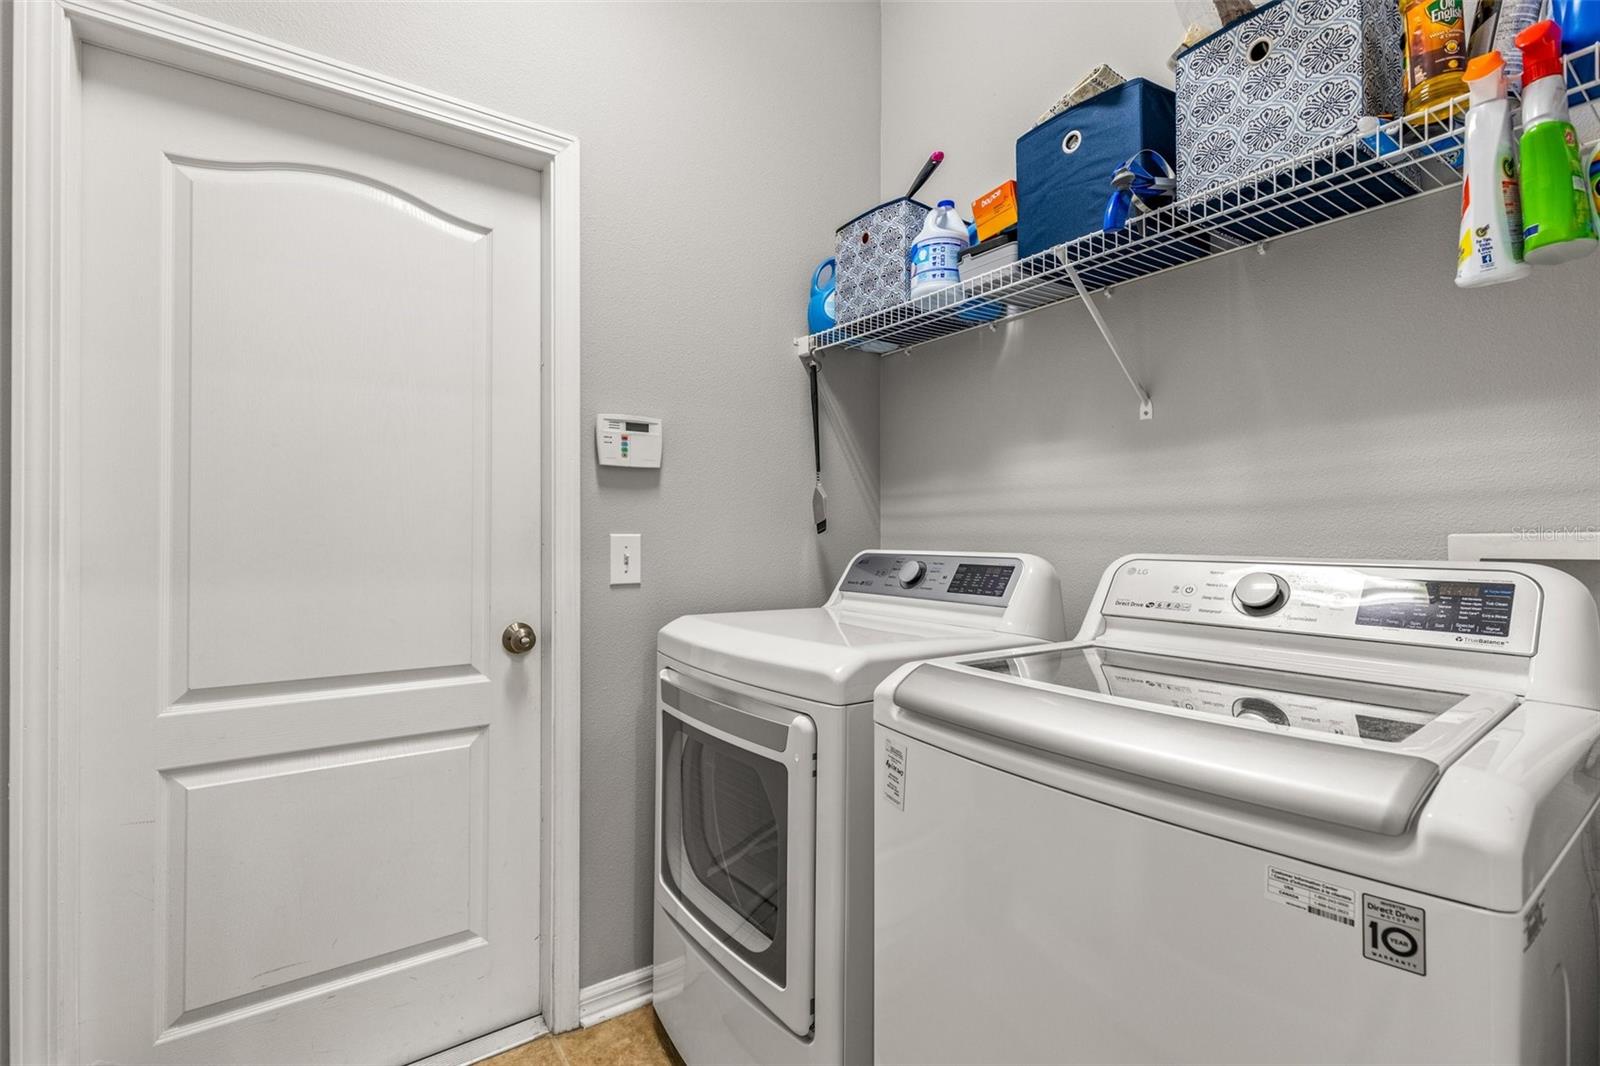 Newer LG Washer and Dryer come with the house!